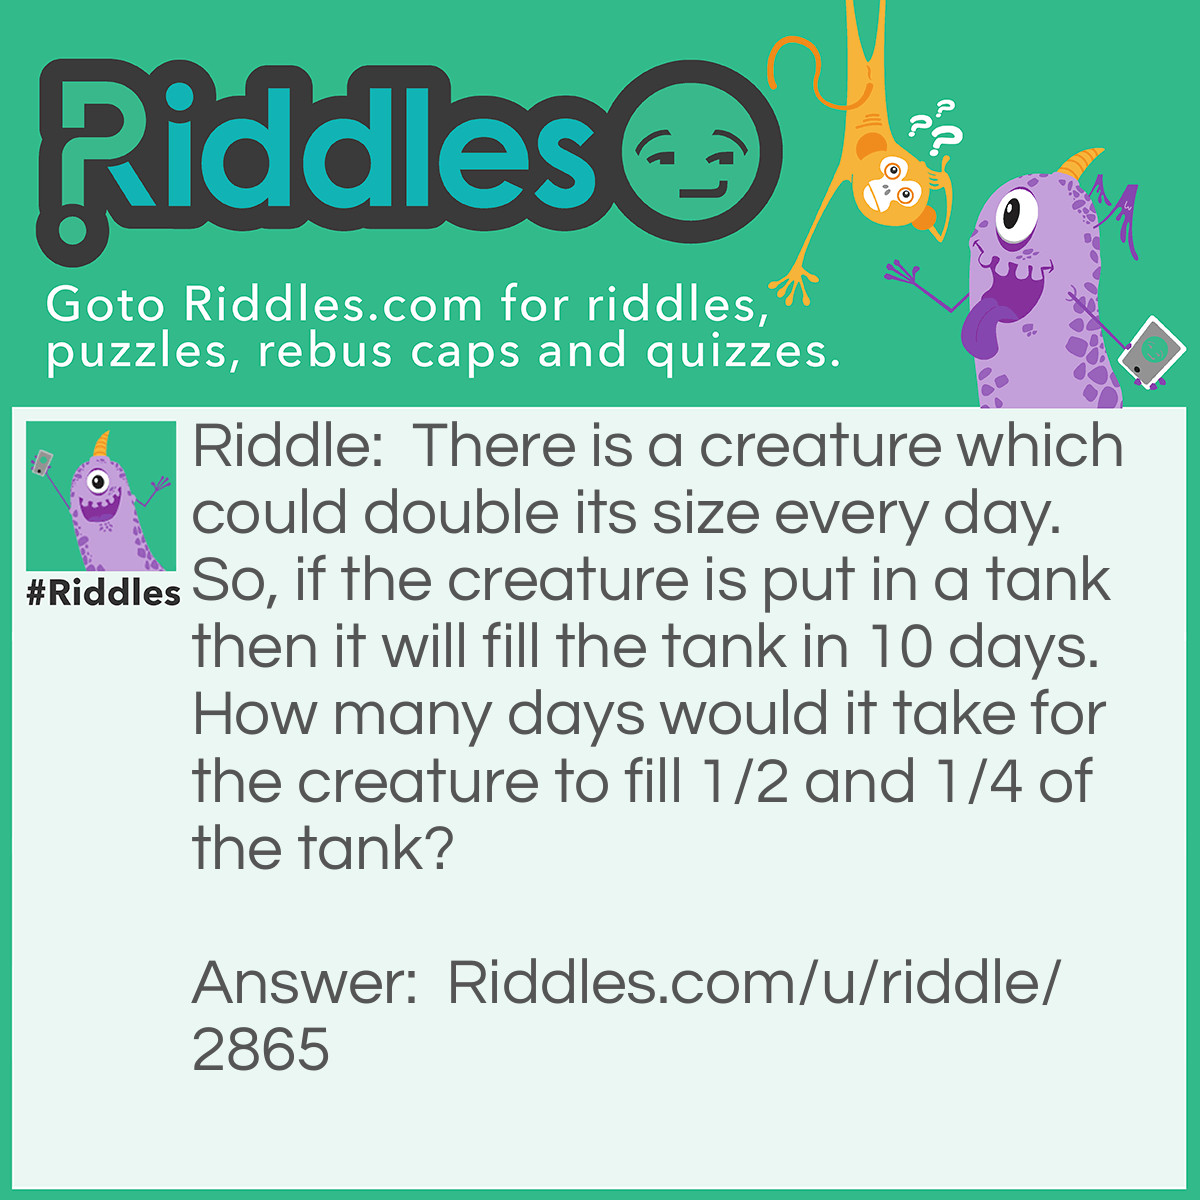 Riddle: There is a creature which could double its size every day. So, if the creature is put in a tank then it will fill the tank in 10 days.
How many days would it take for the creature to fill 1/2 and 1/4 of the tank? Answer: 9 days to fill 1/2 and 8 days to fill 1/4 of the tank.  If the creature fills the tank in 10 days and it doubles every day, on the ninth day it would fill 1/2 the tank. Thus on the 8th day it will fill 1/4 of tank.